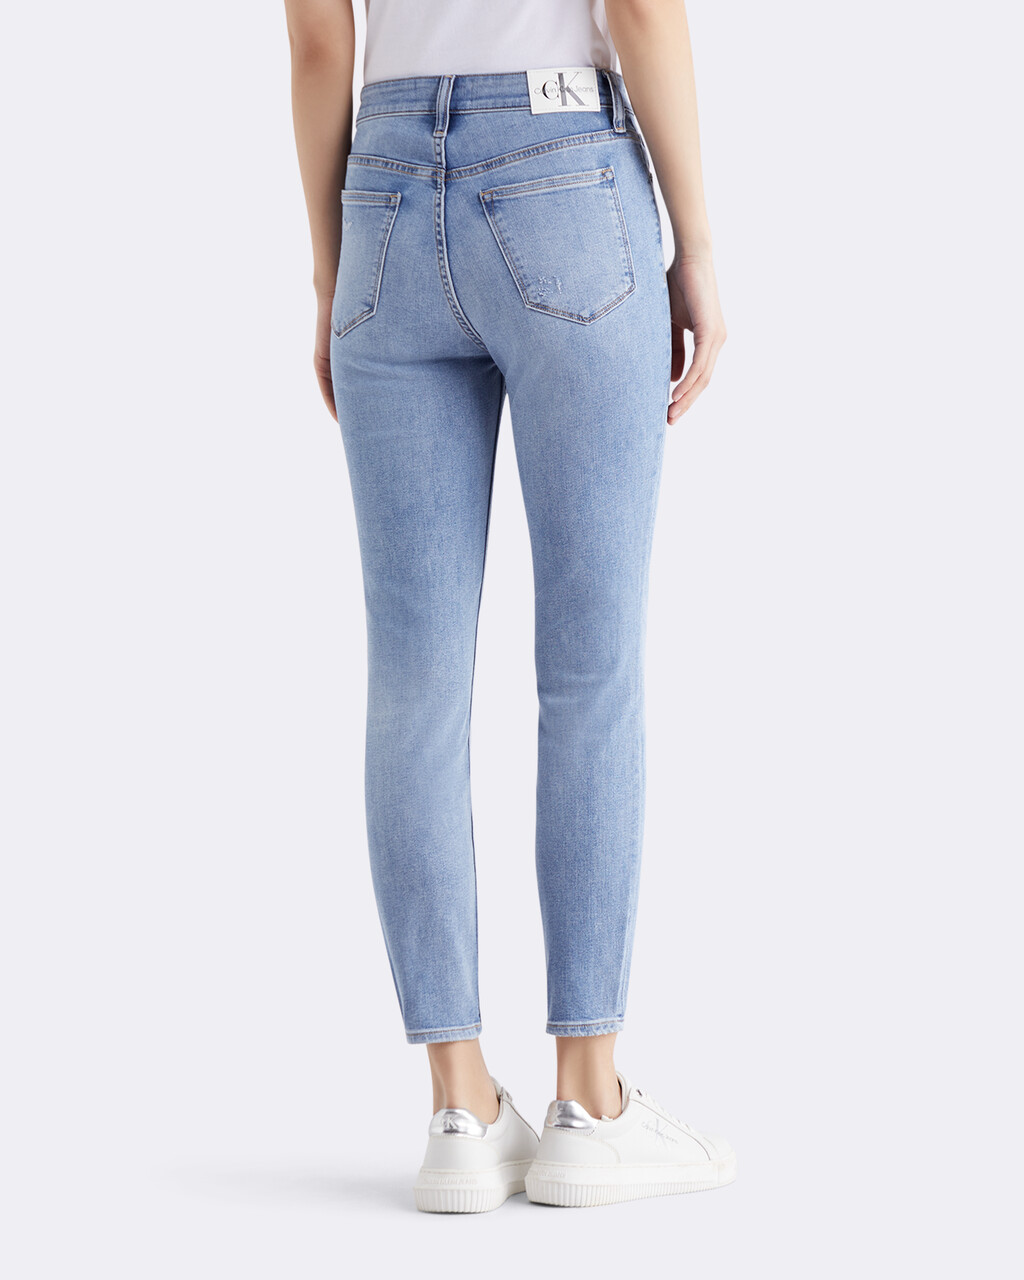 Cooling High Rise Skinny Ankle Jeans, 057 BRIGHT BLUE, hi-res